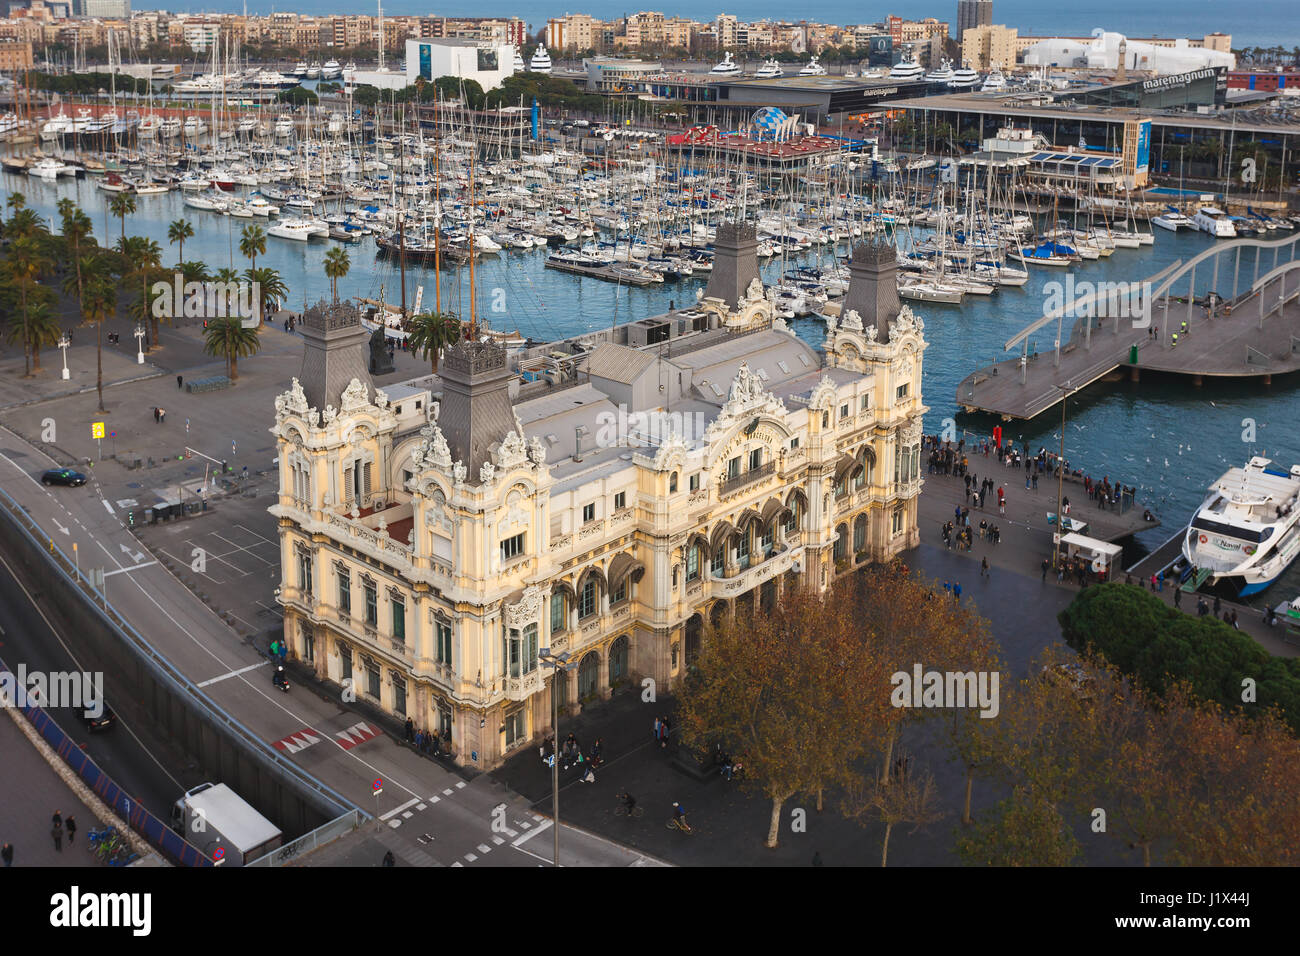 Palace of Port de Barcelona, view from highest point of Columbus tower in Barcelona, Spain Stock Photo